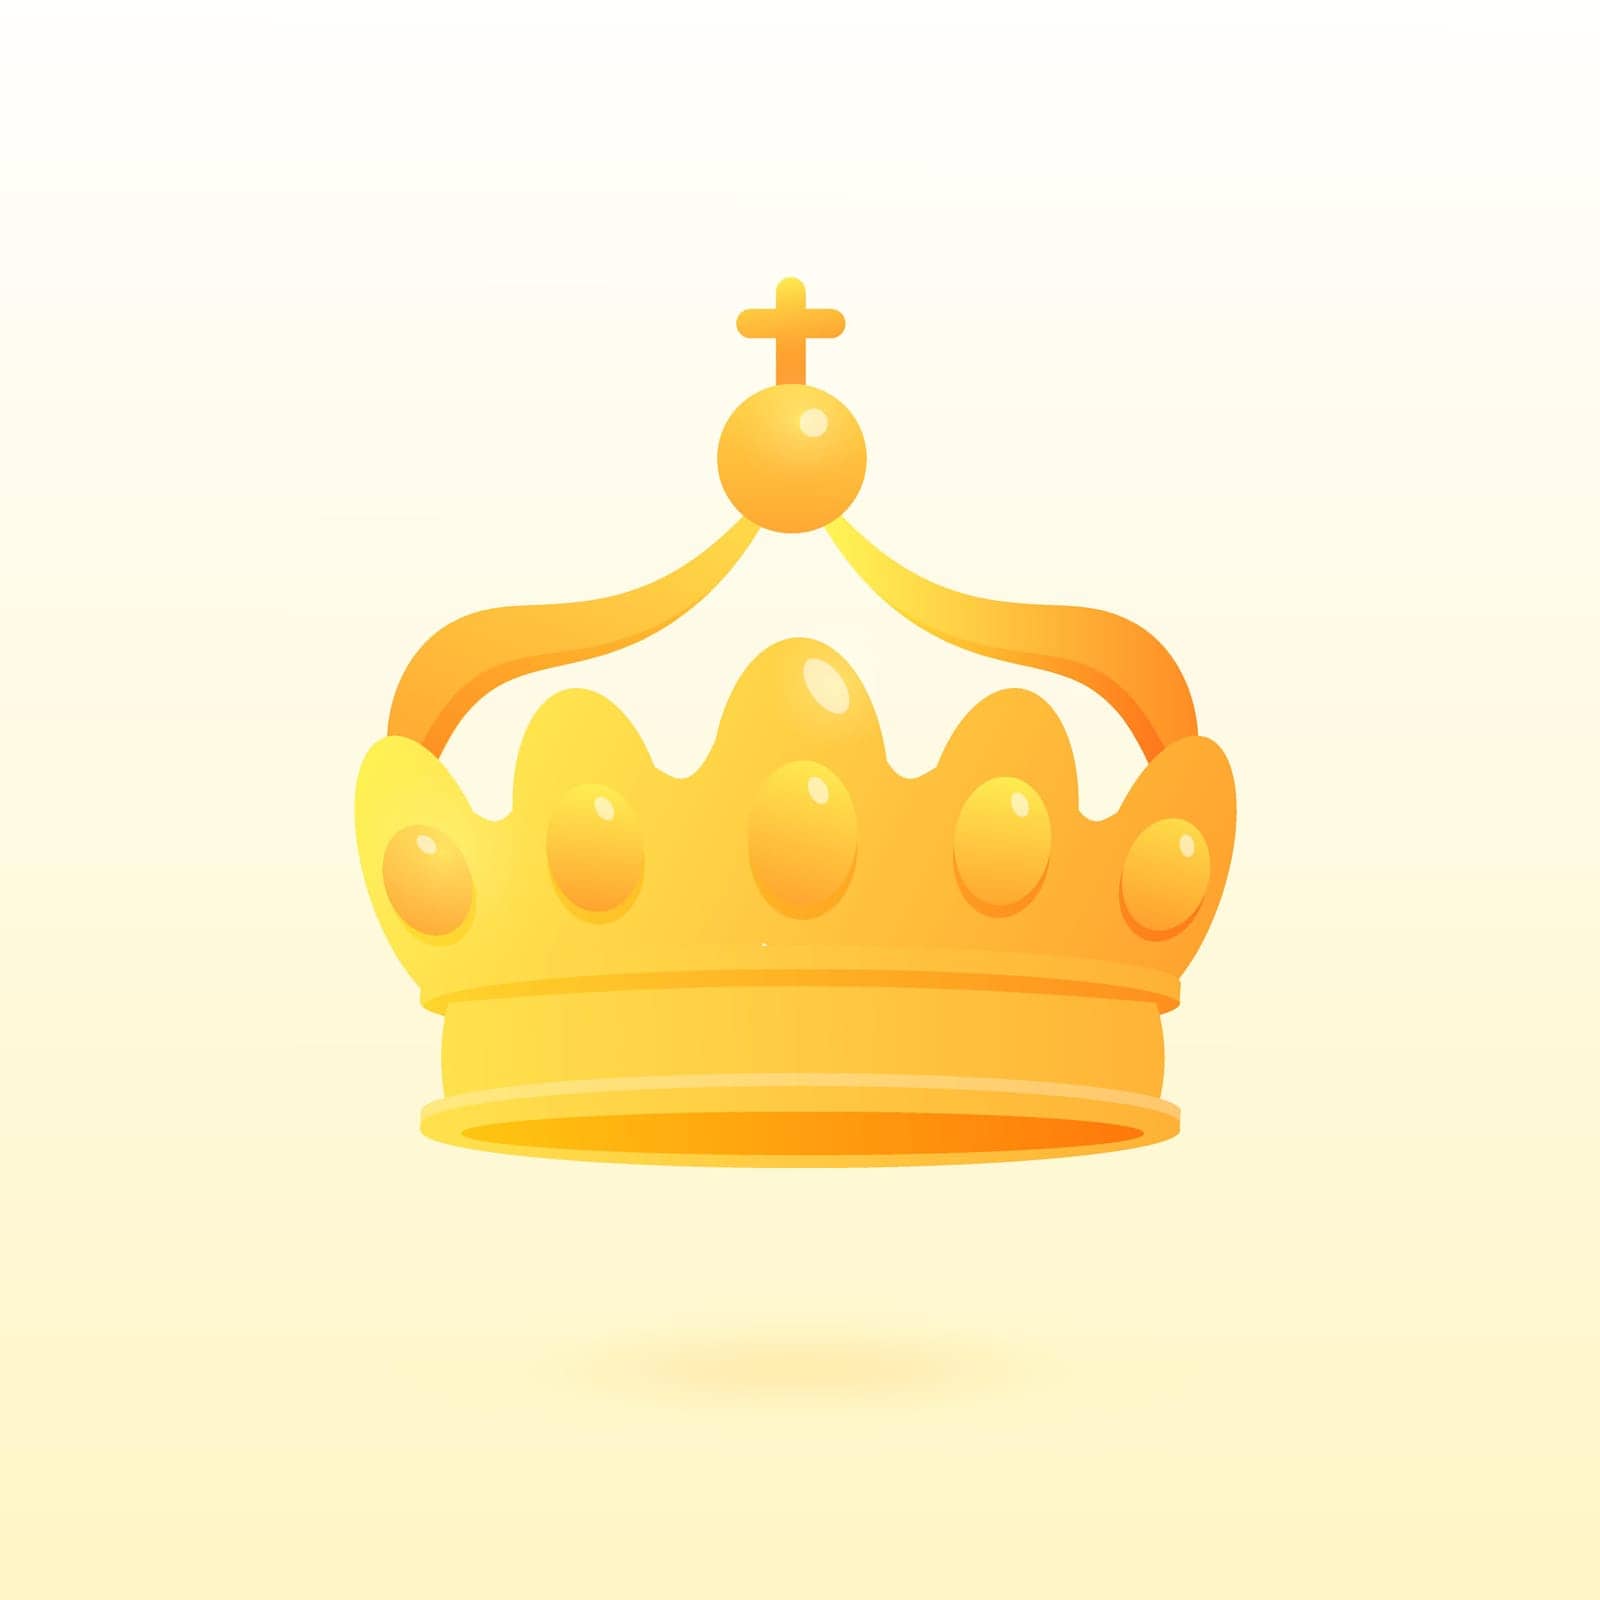 Crown golden game vector Award icon for leader or winner King or monarch, queen or princess tiara, prince headdress 3D Classic heraldic imperial sign. Vintage or old jewelry, monarchy theme EPS by Alxyzt